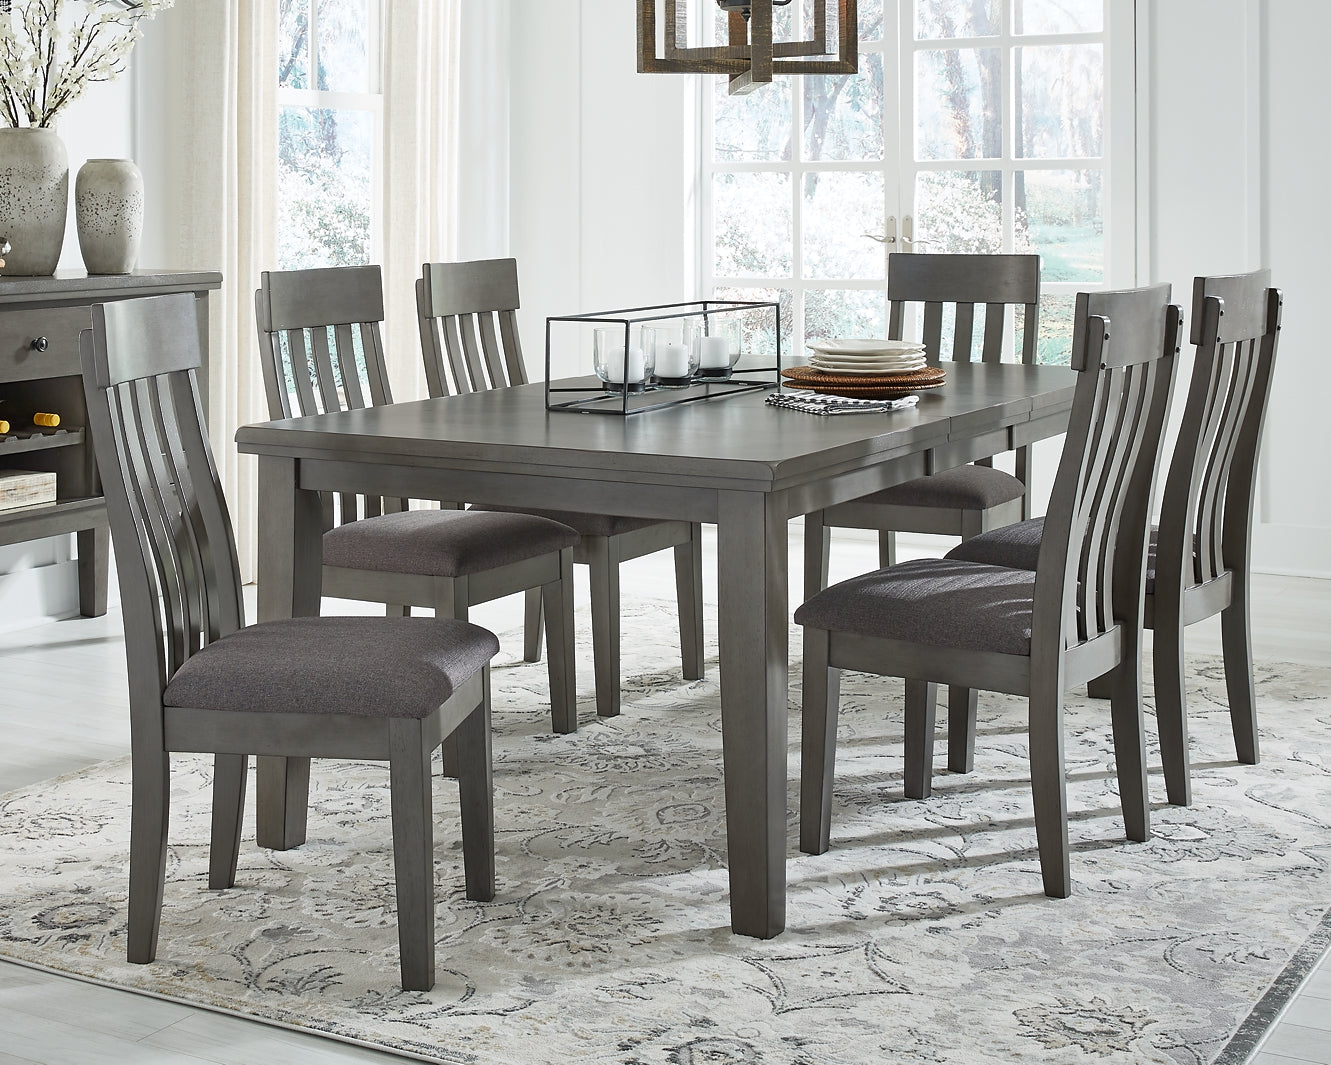 Hallanden Dining Table and 6 Chairs with Storage Wilson Furniture (OH)  in Bridgeport, Ohio. Serving Bridgeport, Yorkville, Bellaire, & Avondale